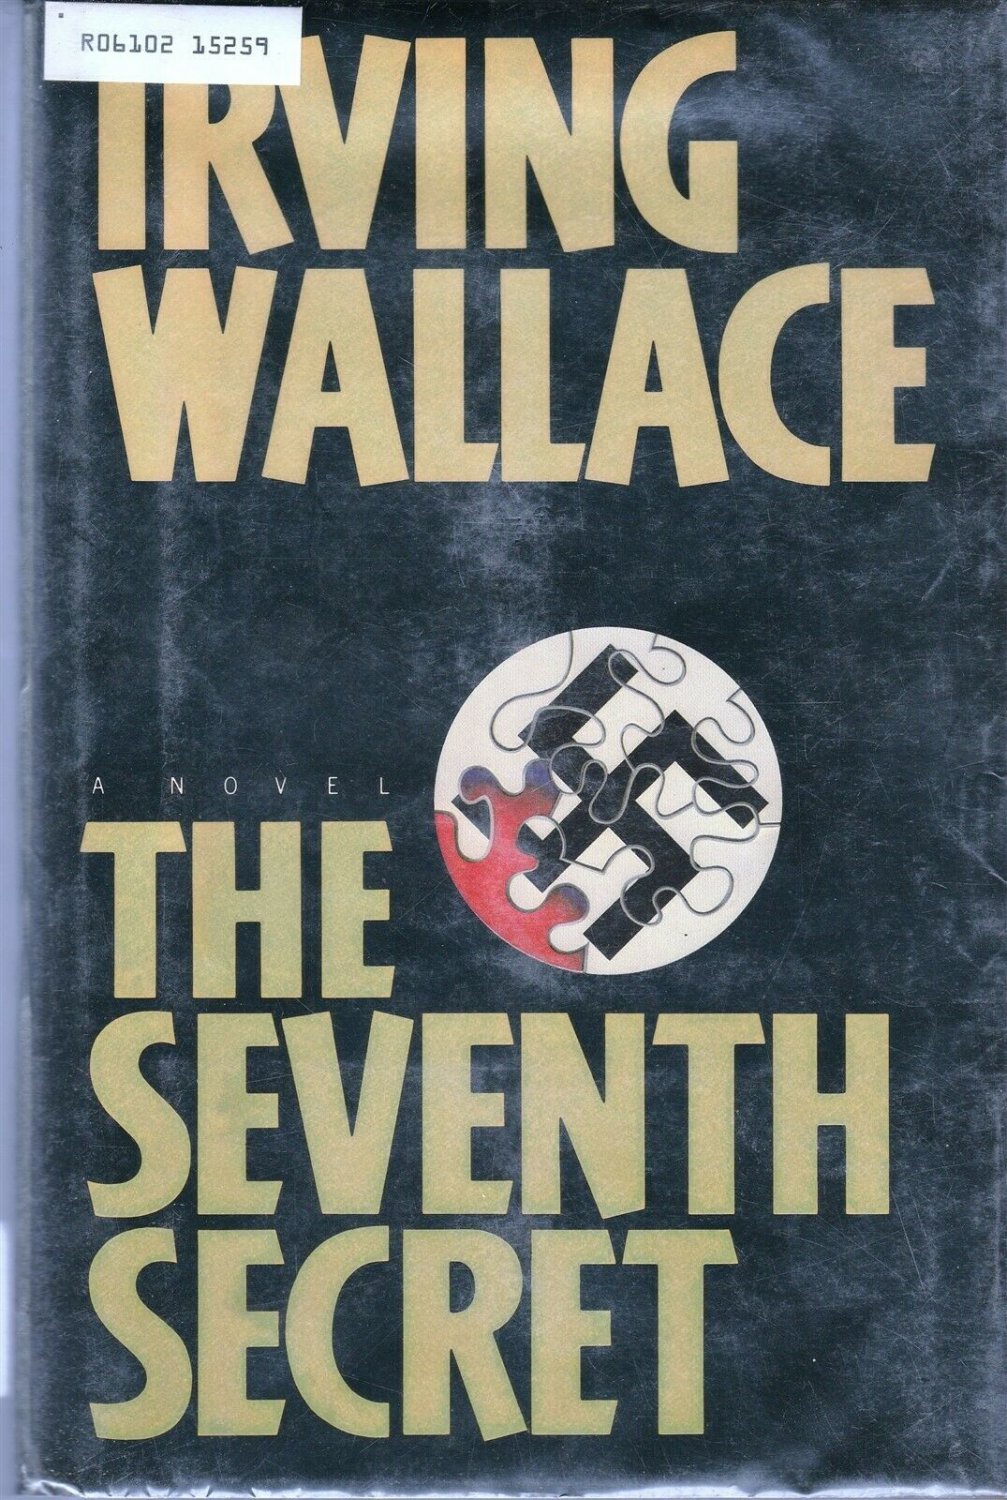 Irving Wallace - The Seventh Secret - 1986 - Hardcover